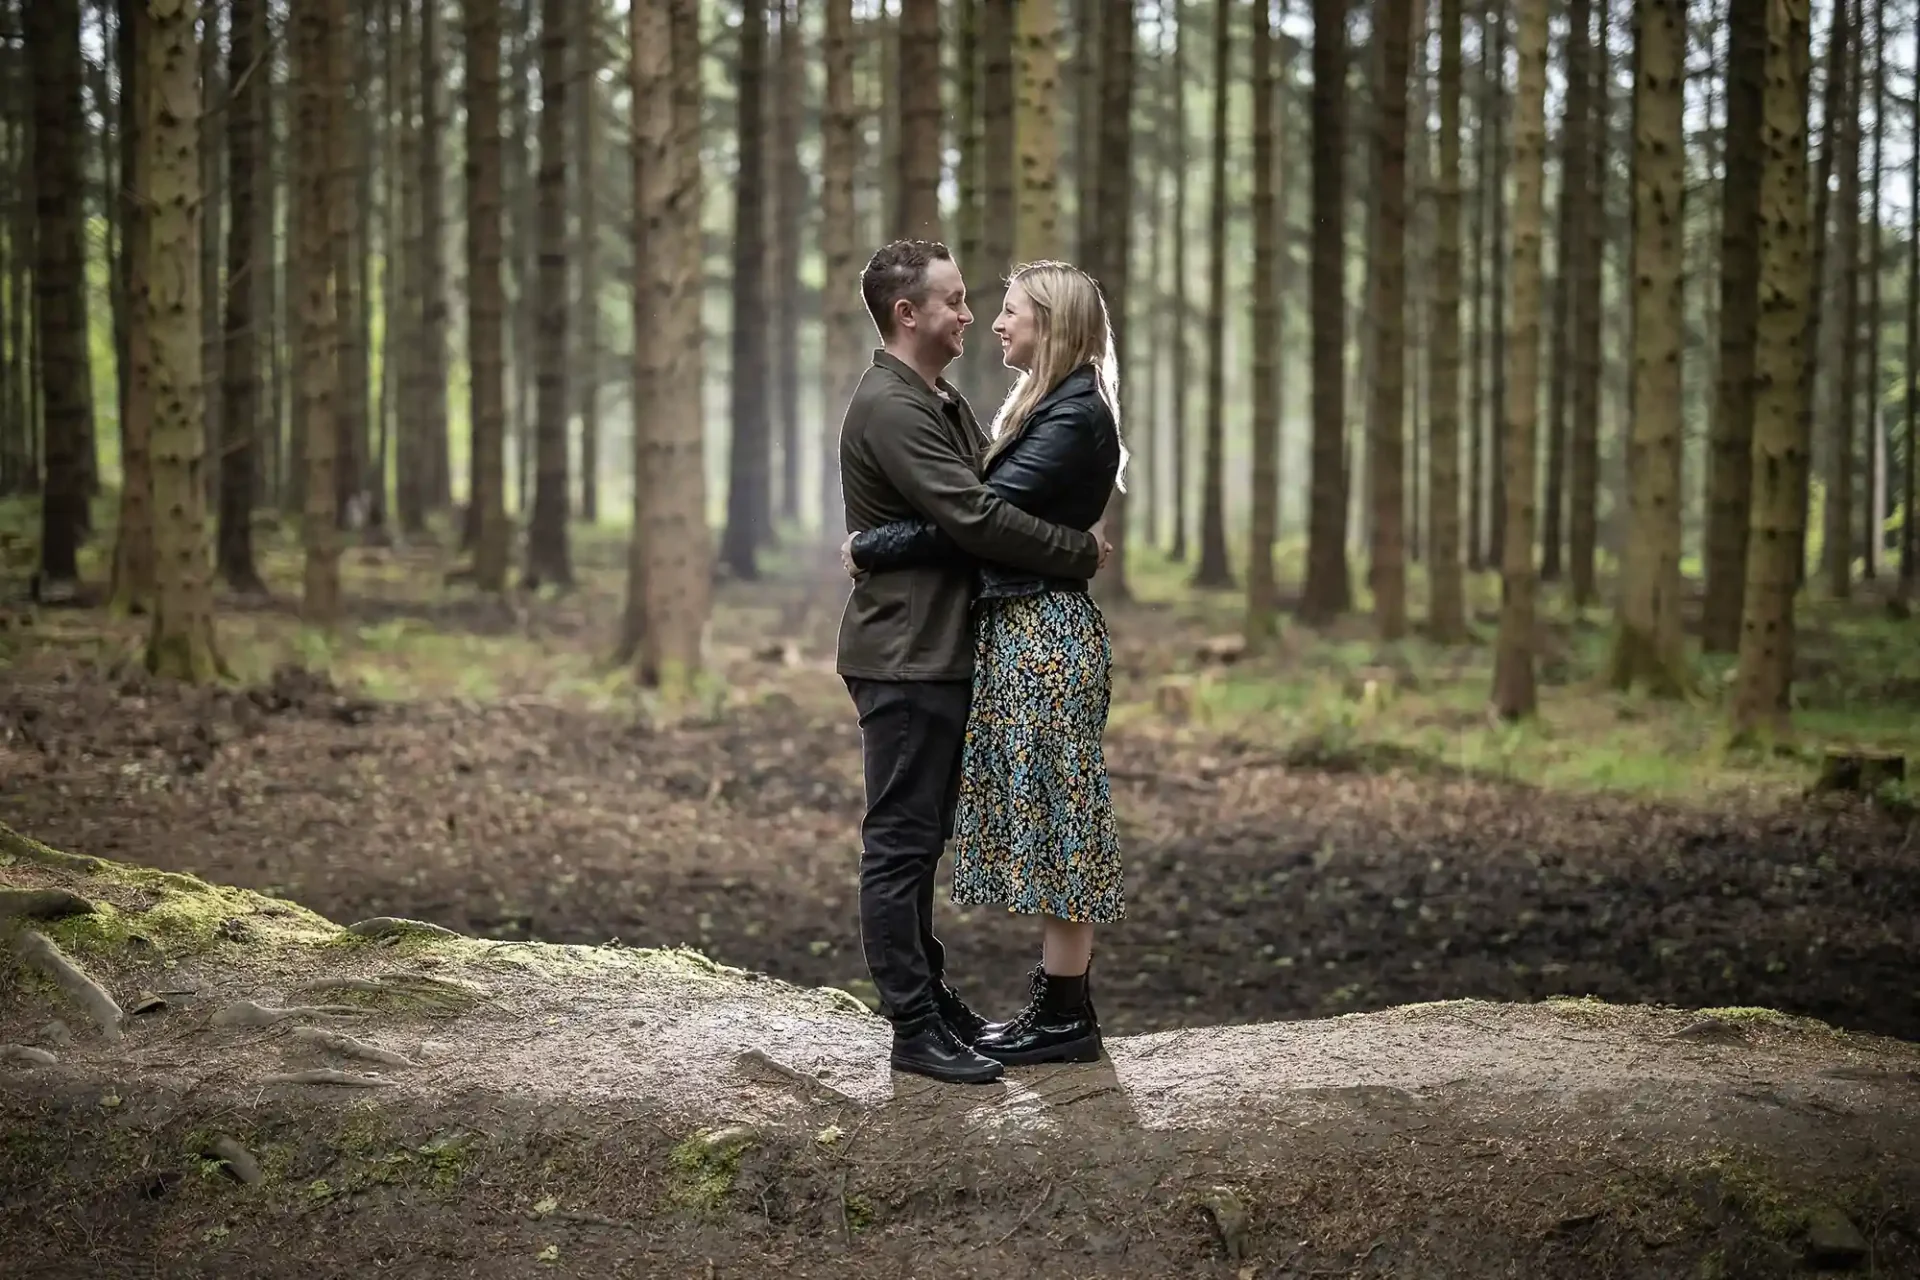 A couple embracing and smiling at each other in a dense, wooded forest.